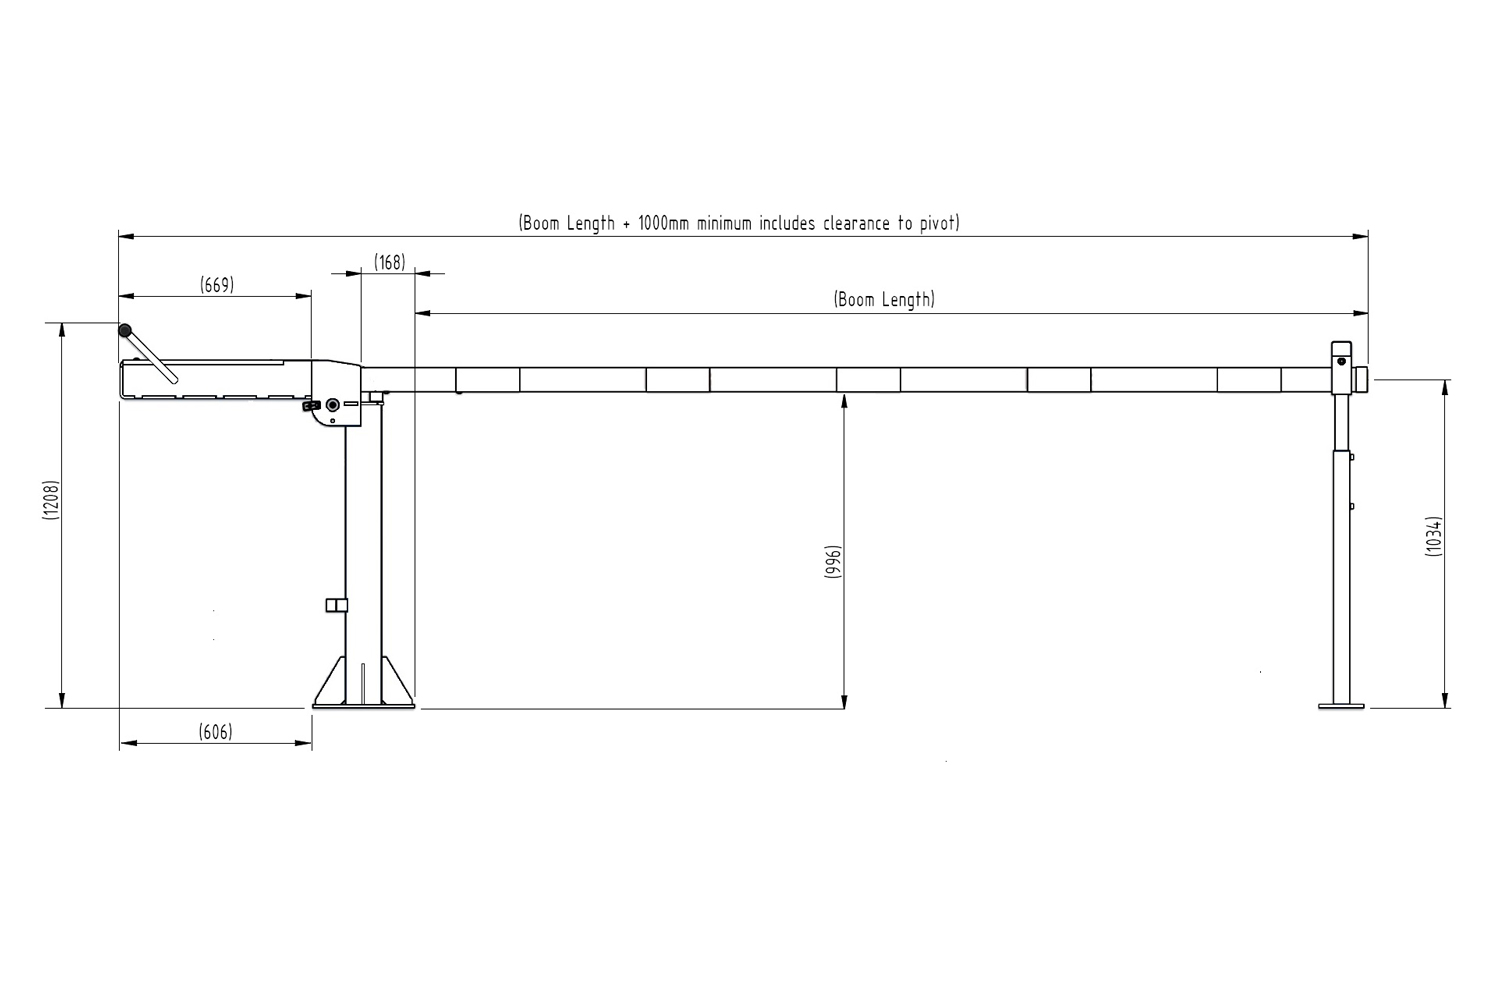 Manual Arm Barrier Dimensions